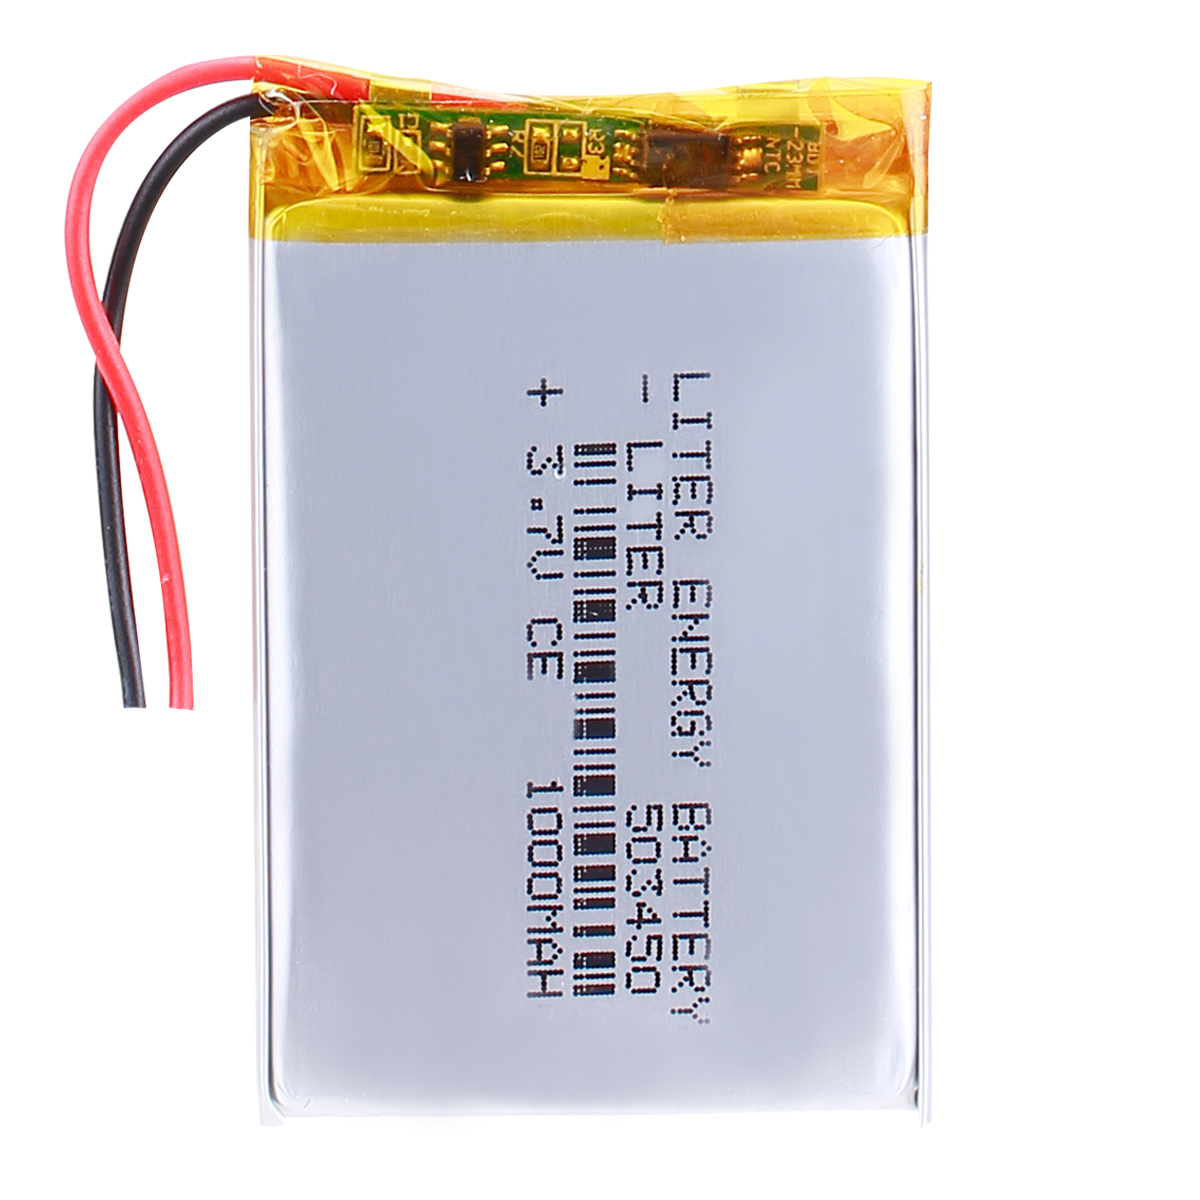 Rechargeable LiPo batteries 503450 1000mAh with 3.7Wh